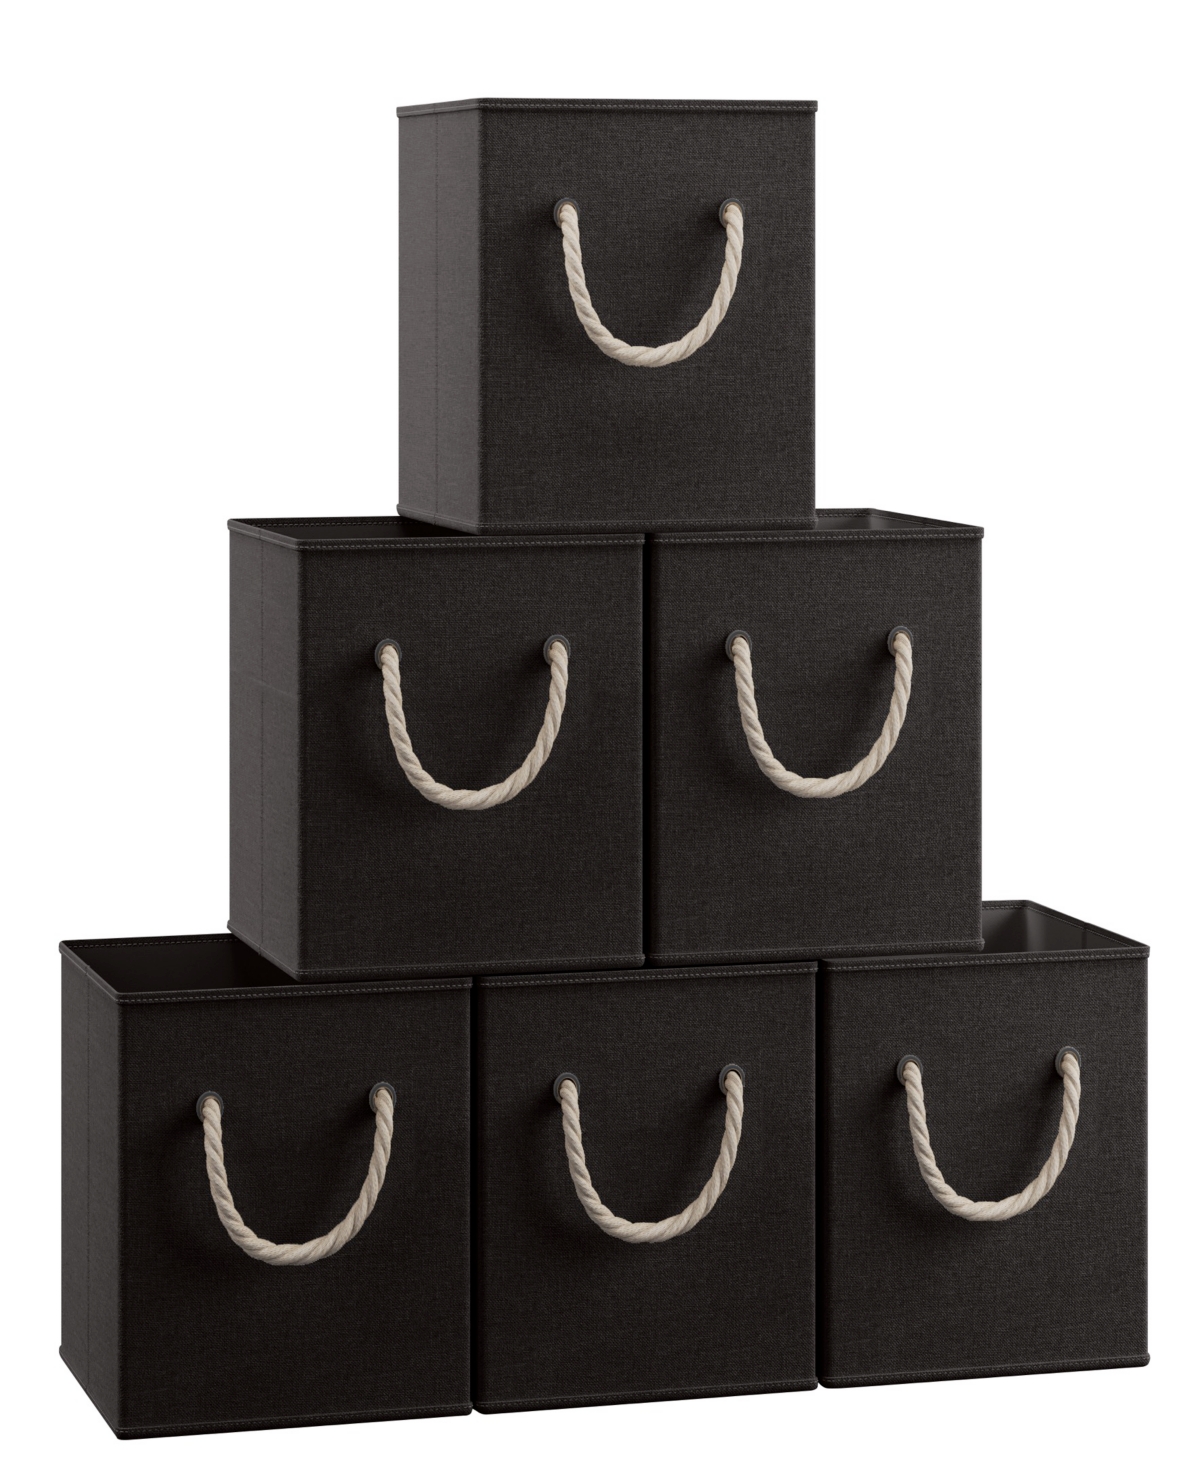 Ornavo Home Foldable Linen Storage Cube Bin With Rope Handles In Black